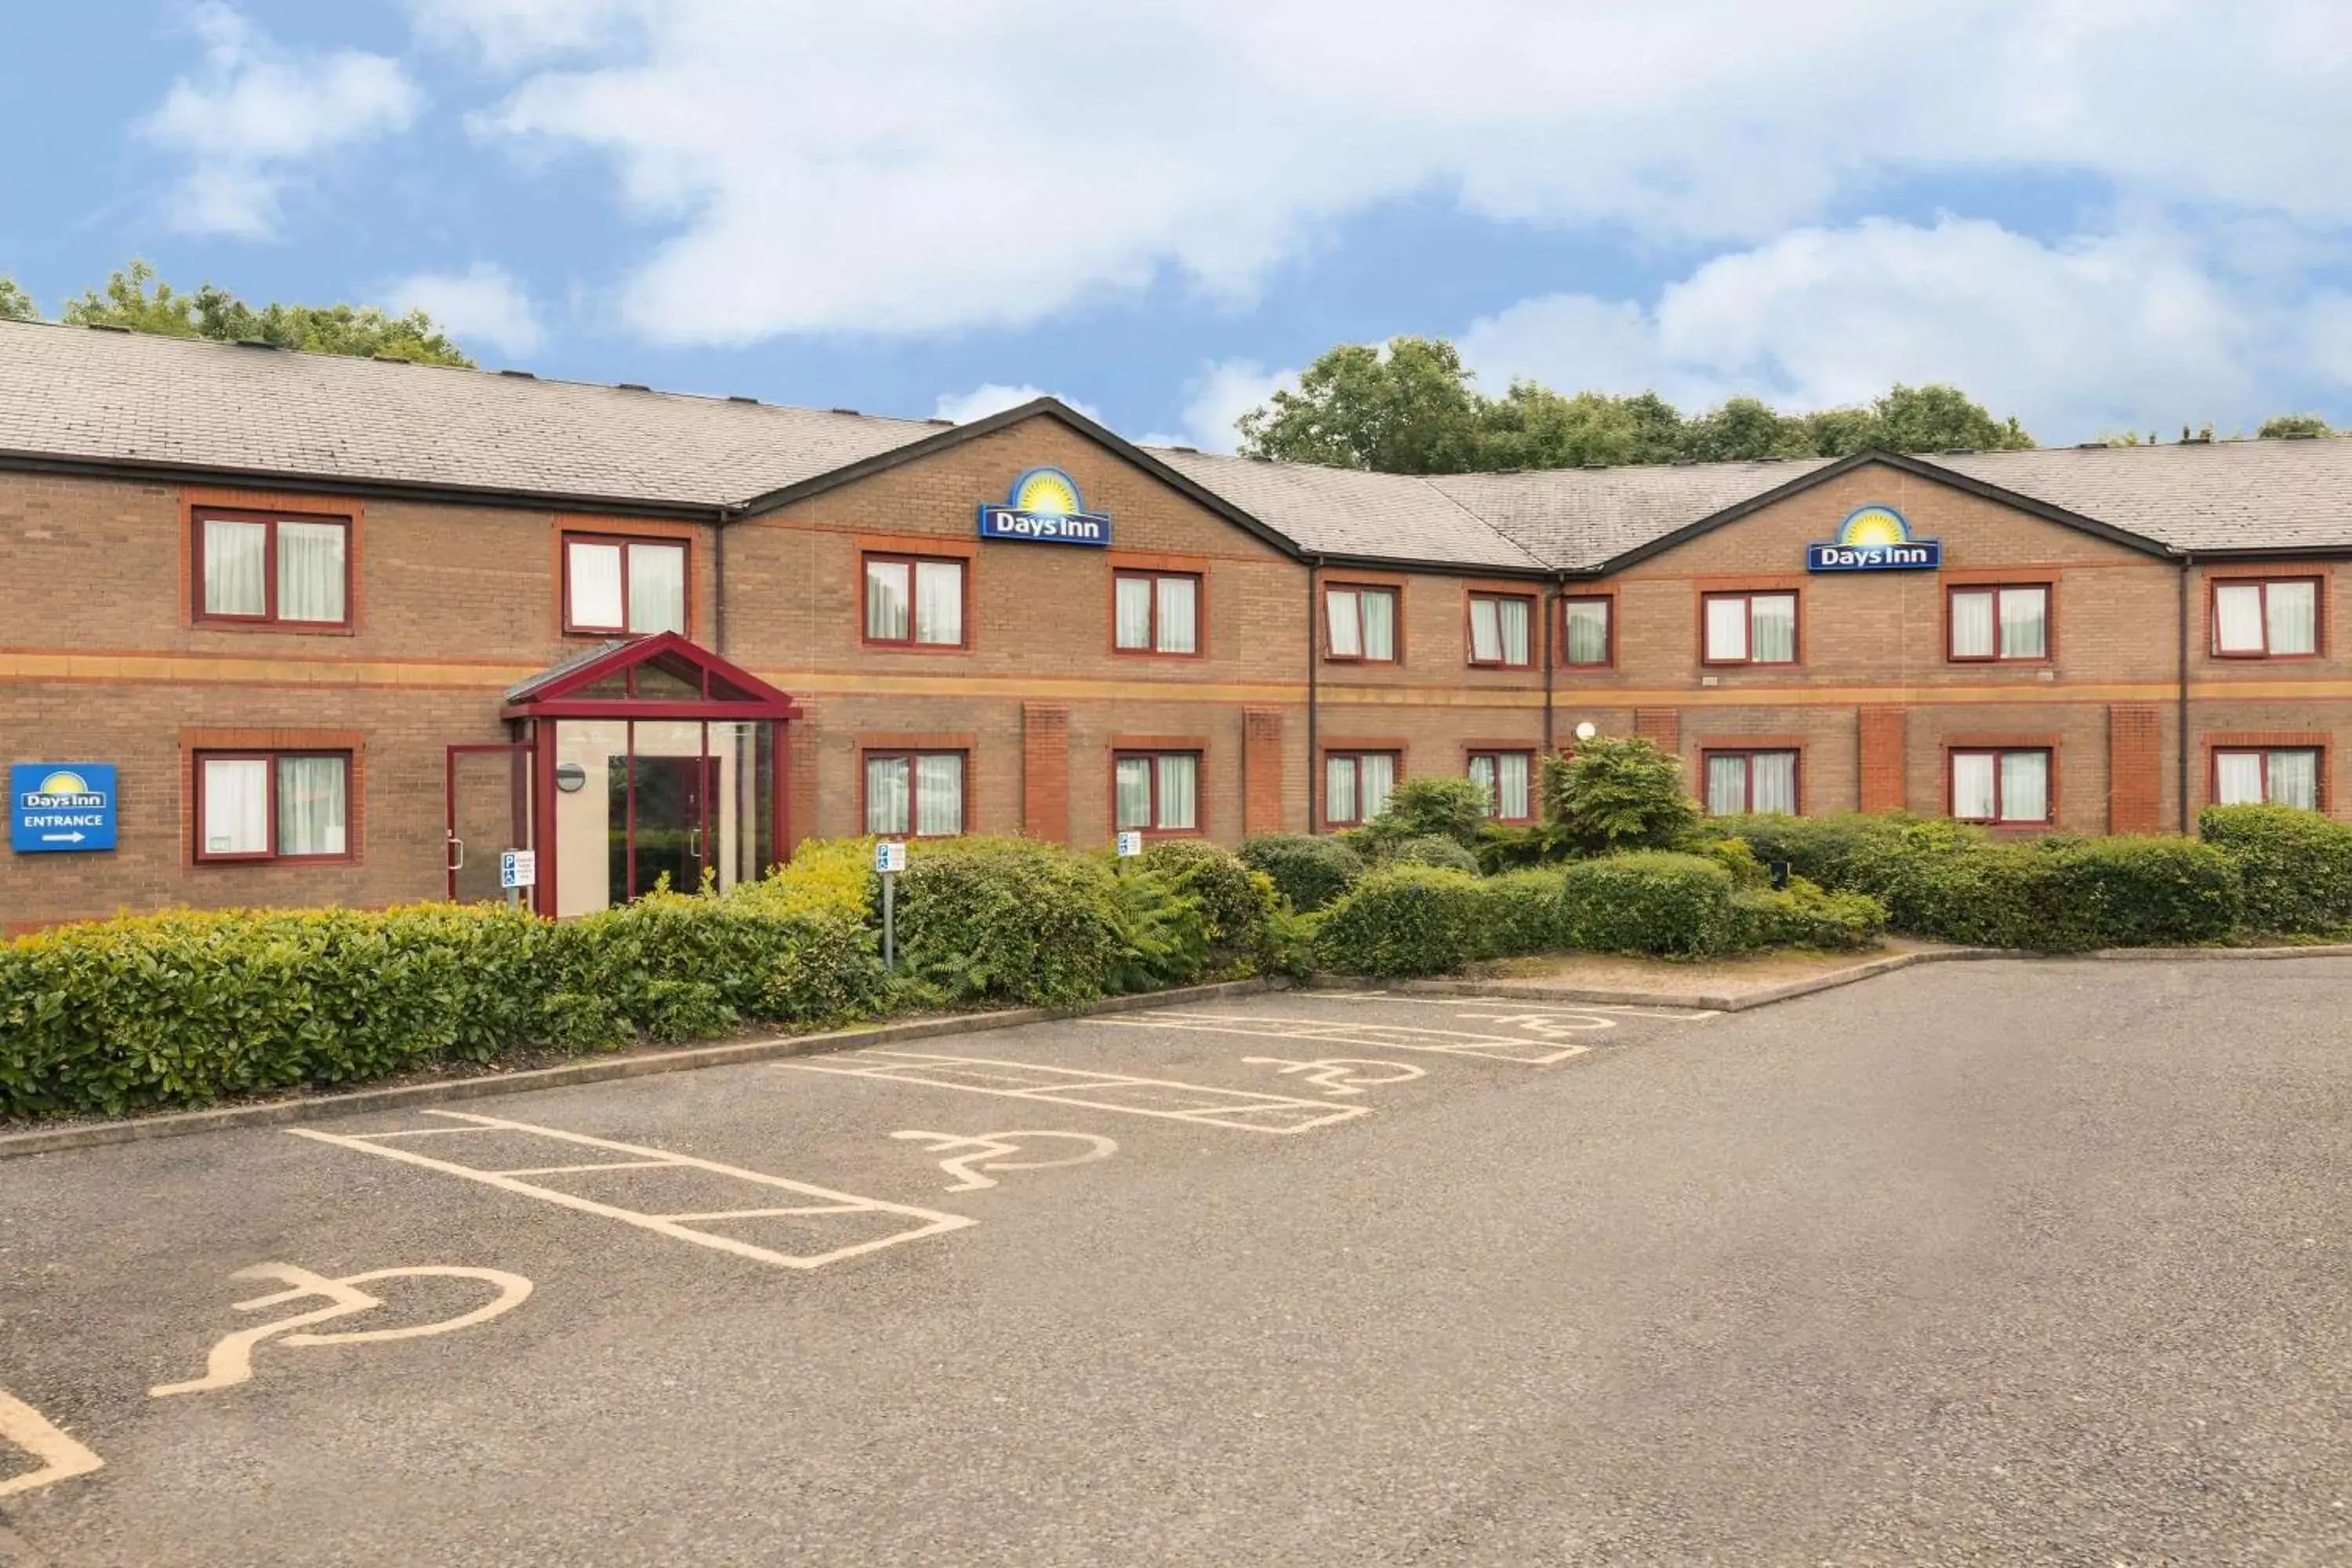 Property Building in Days Inn Magor